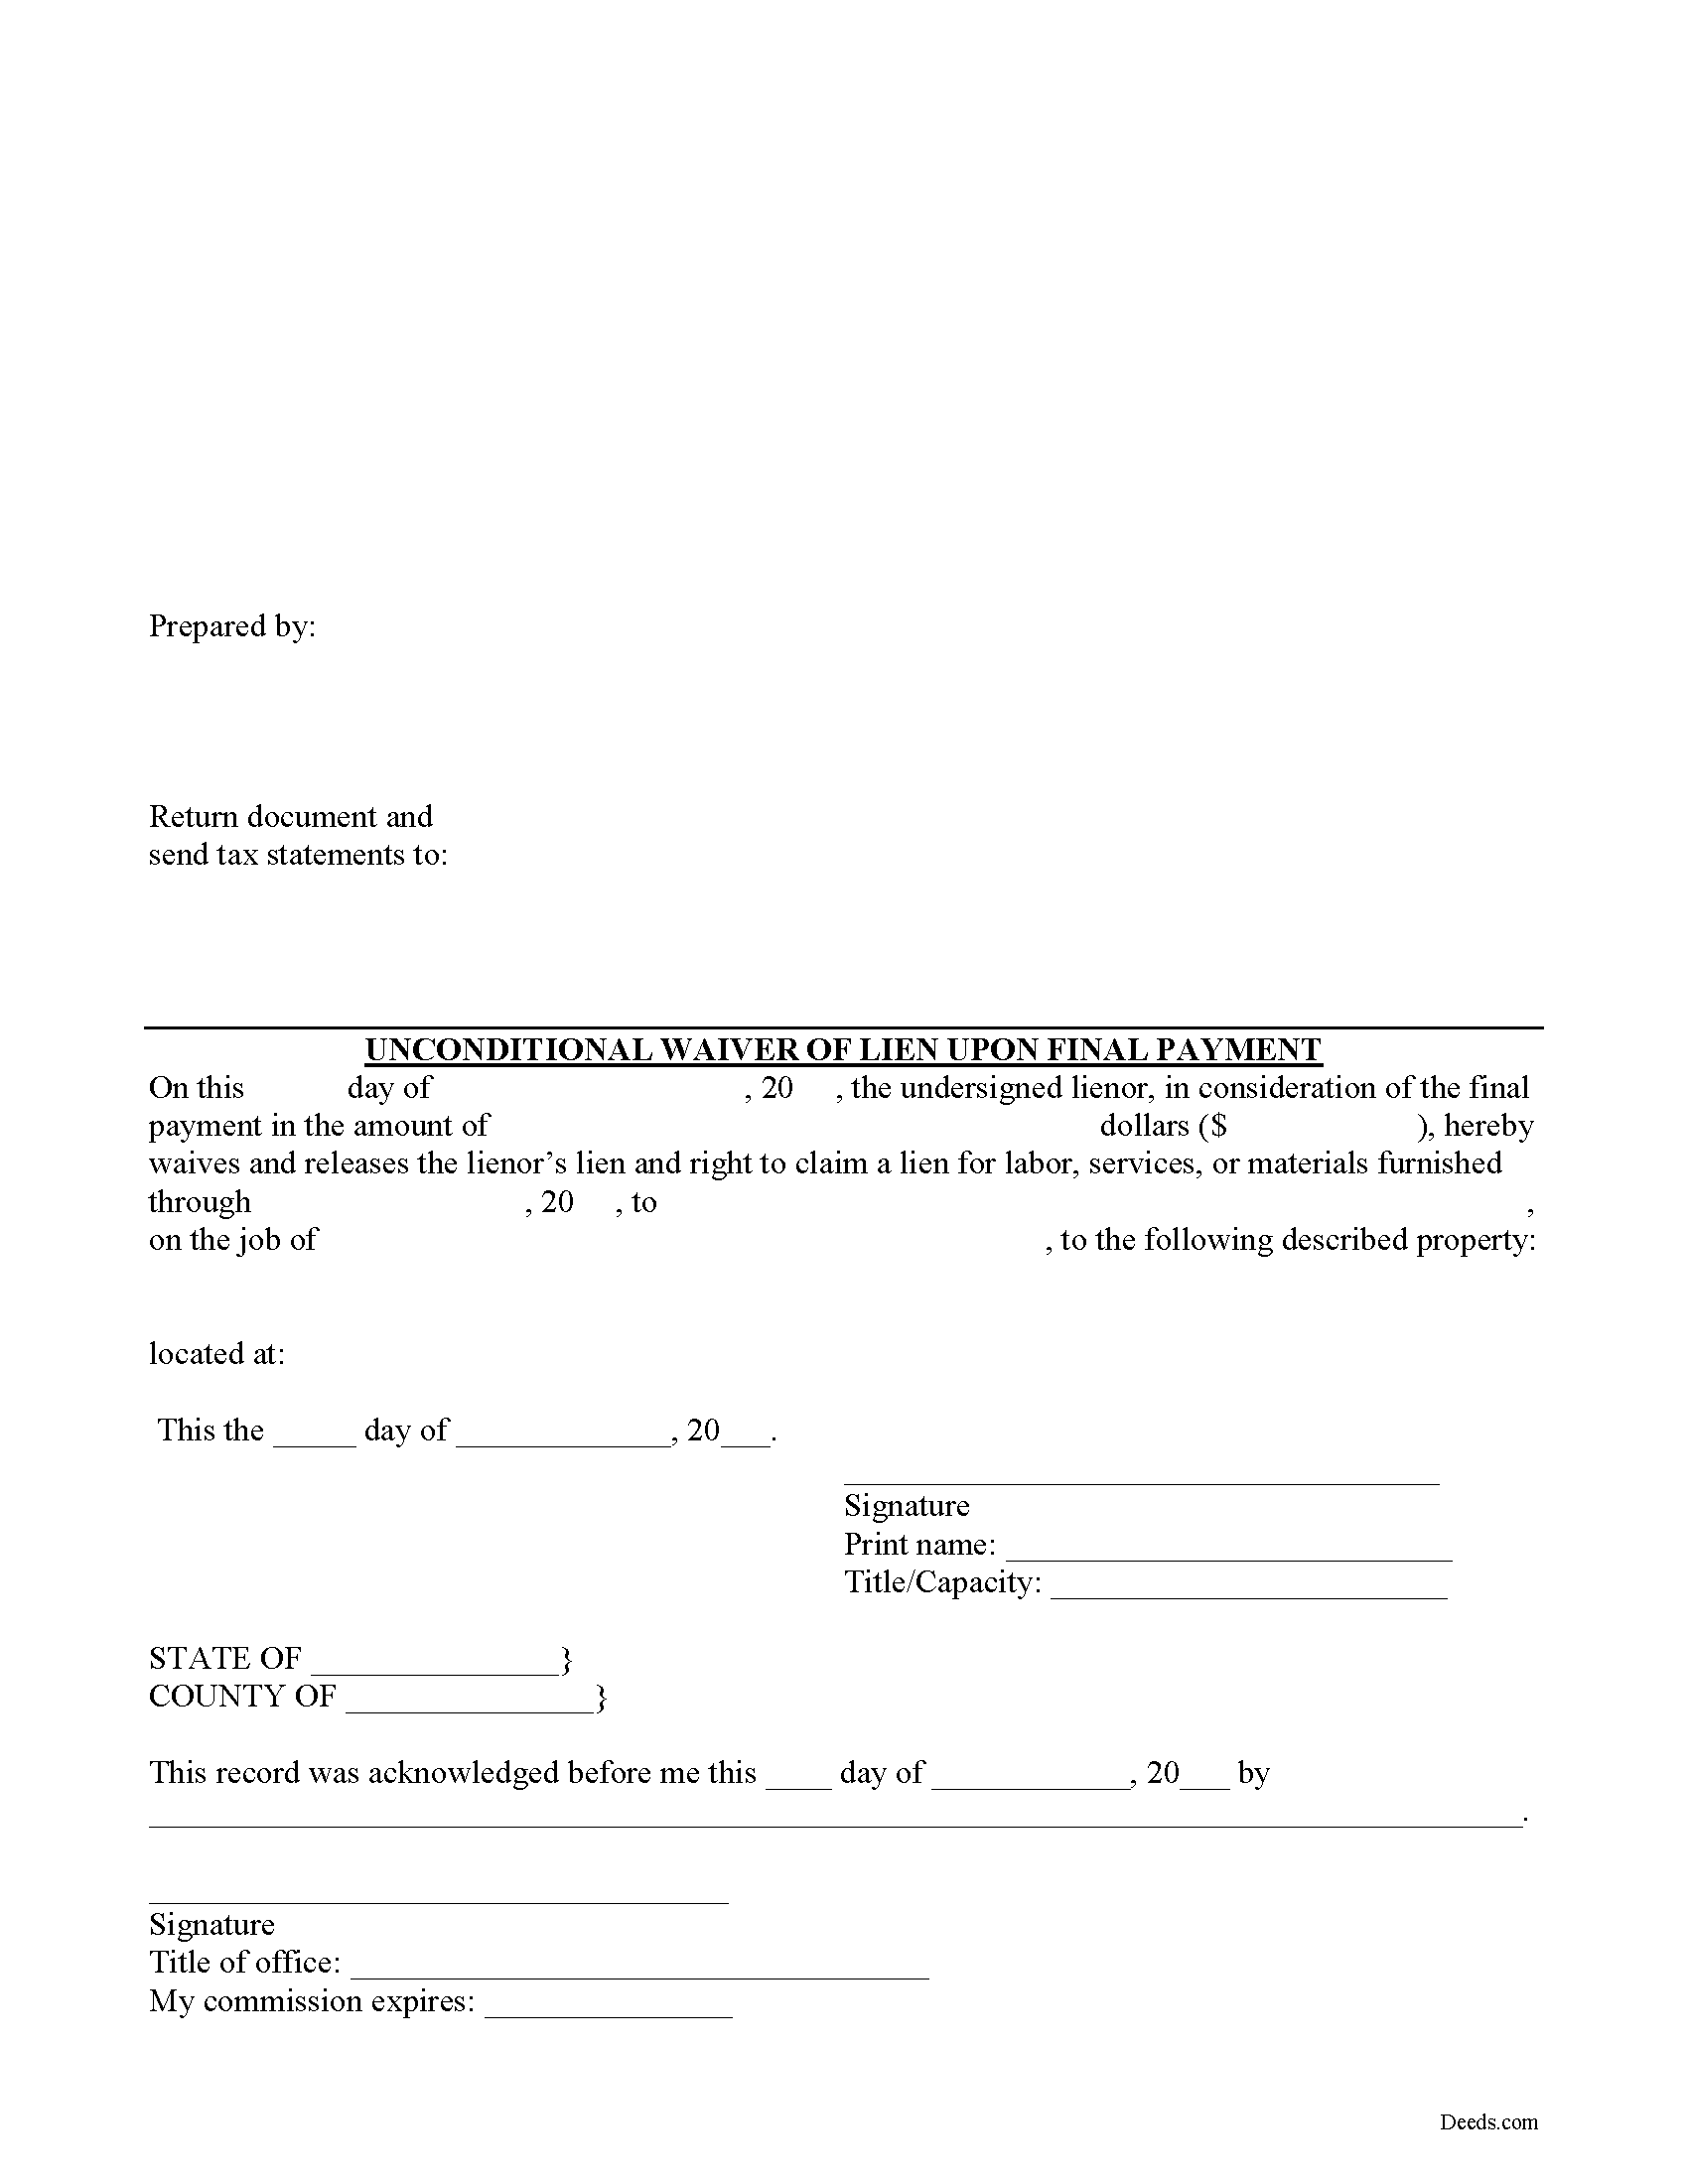 Unconditional Waiver on Final Payment Form